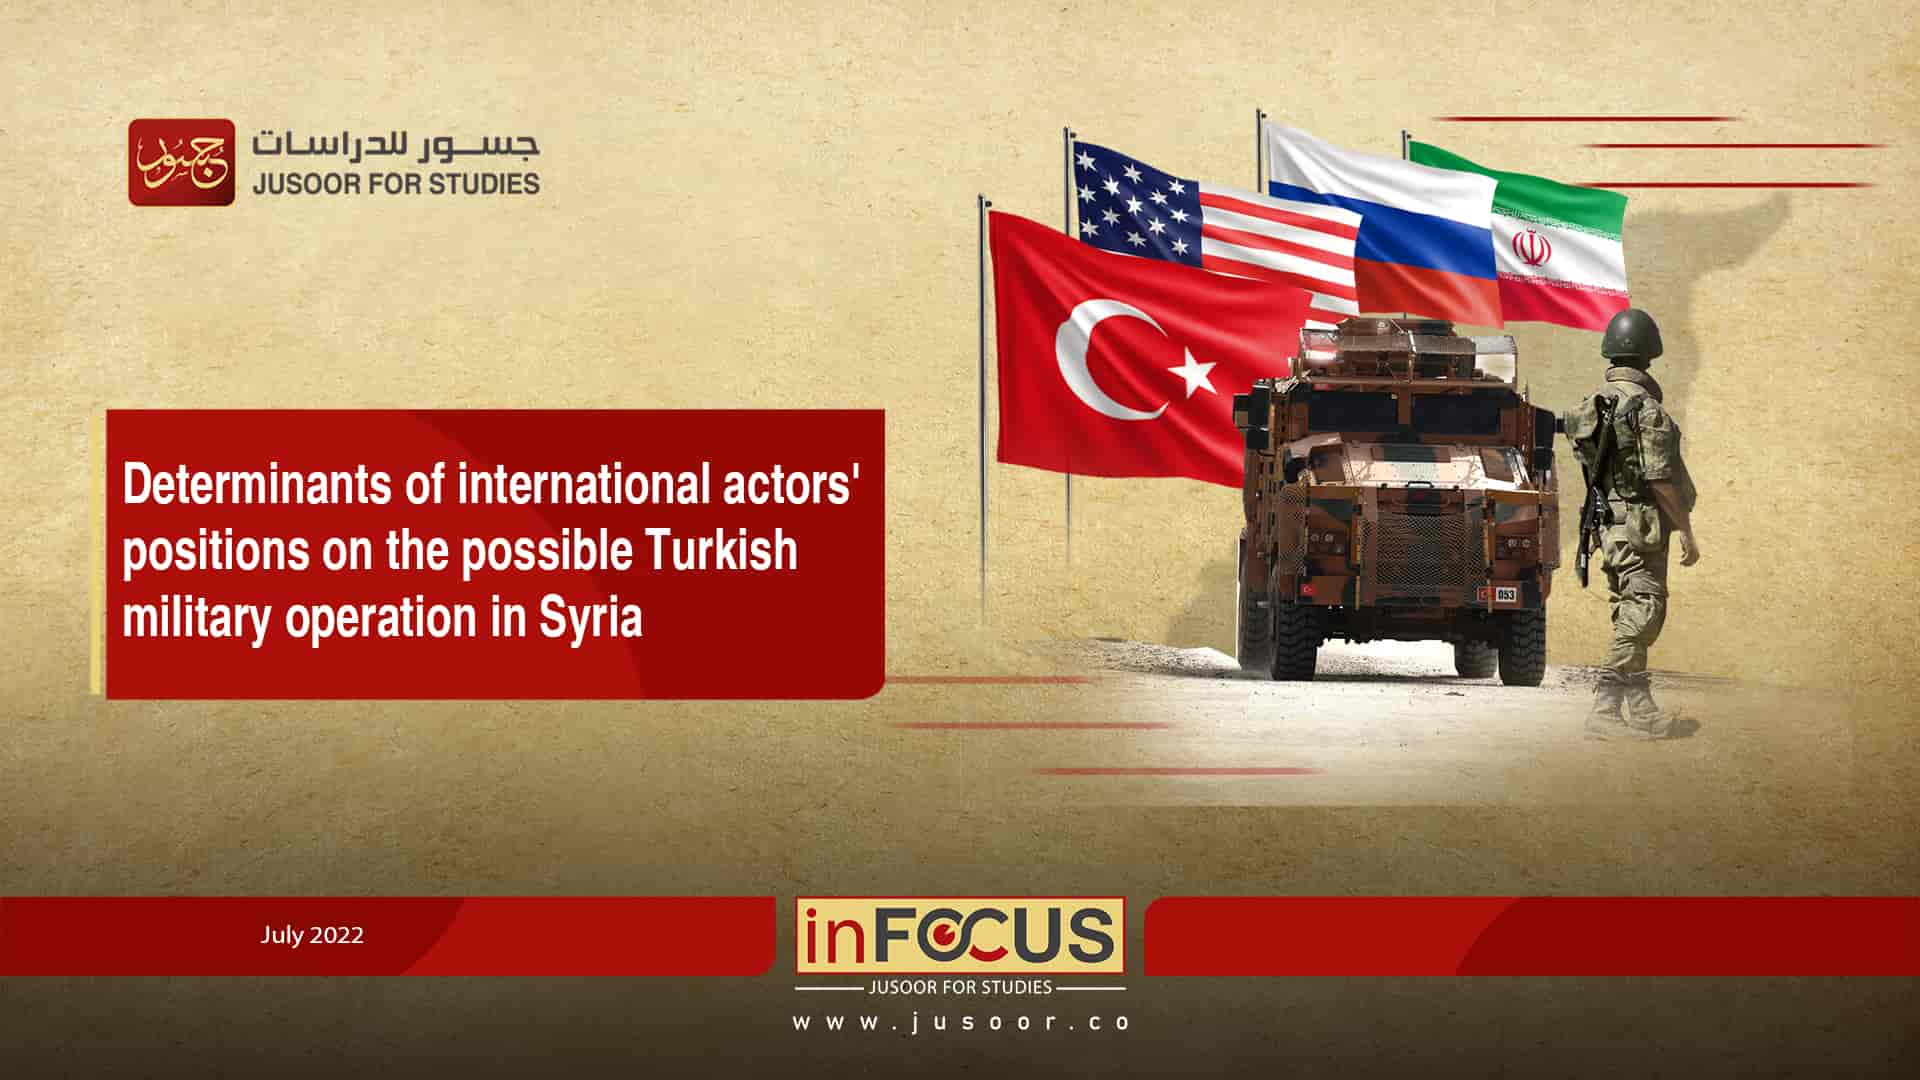 Determinants of international actors' positions on the possible Turkish military operation in Syria